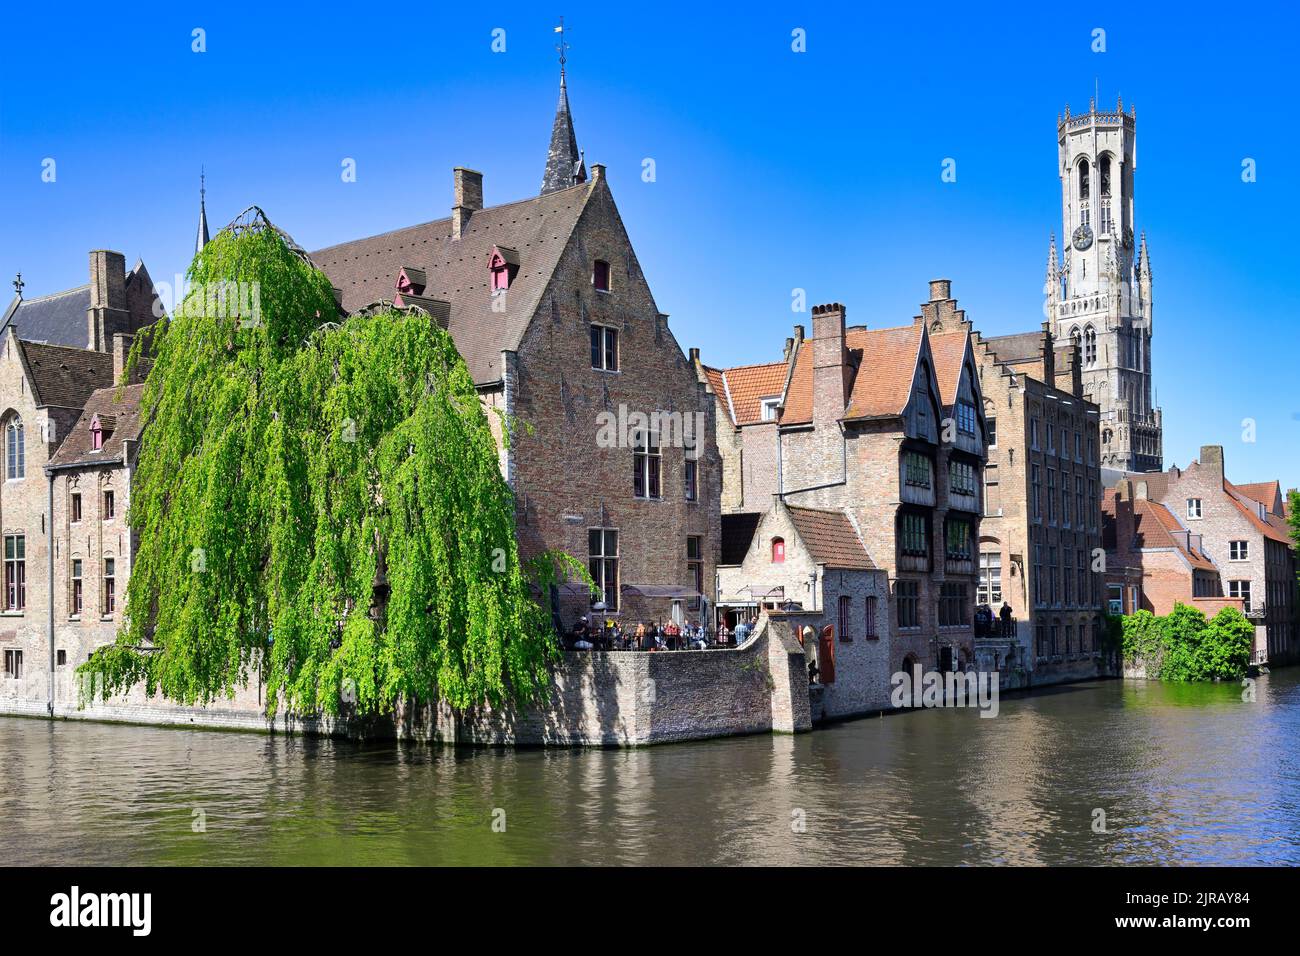 Famous canal of Rozenhoedkaai and the Belfry in the background, Bruges, Belgium Stock Photo